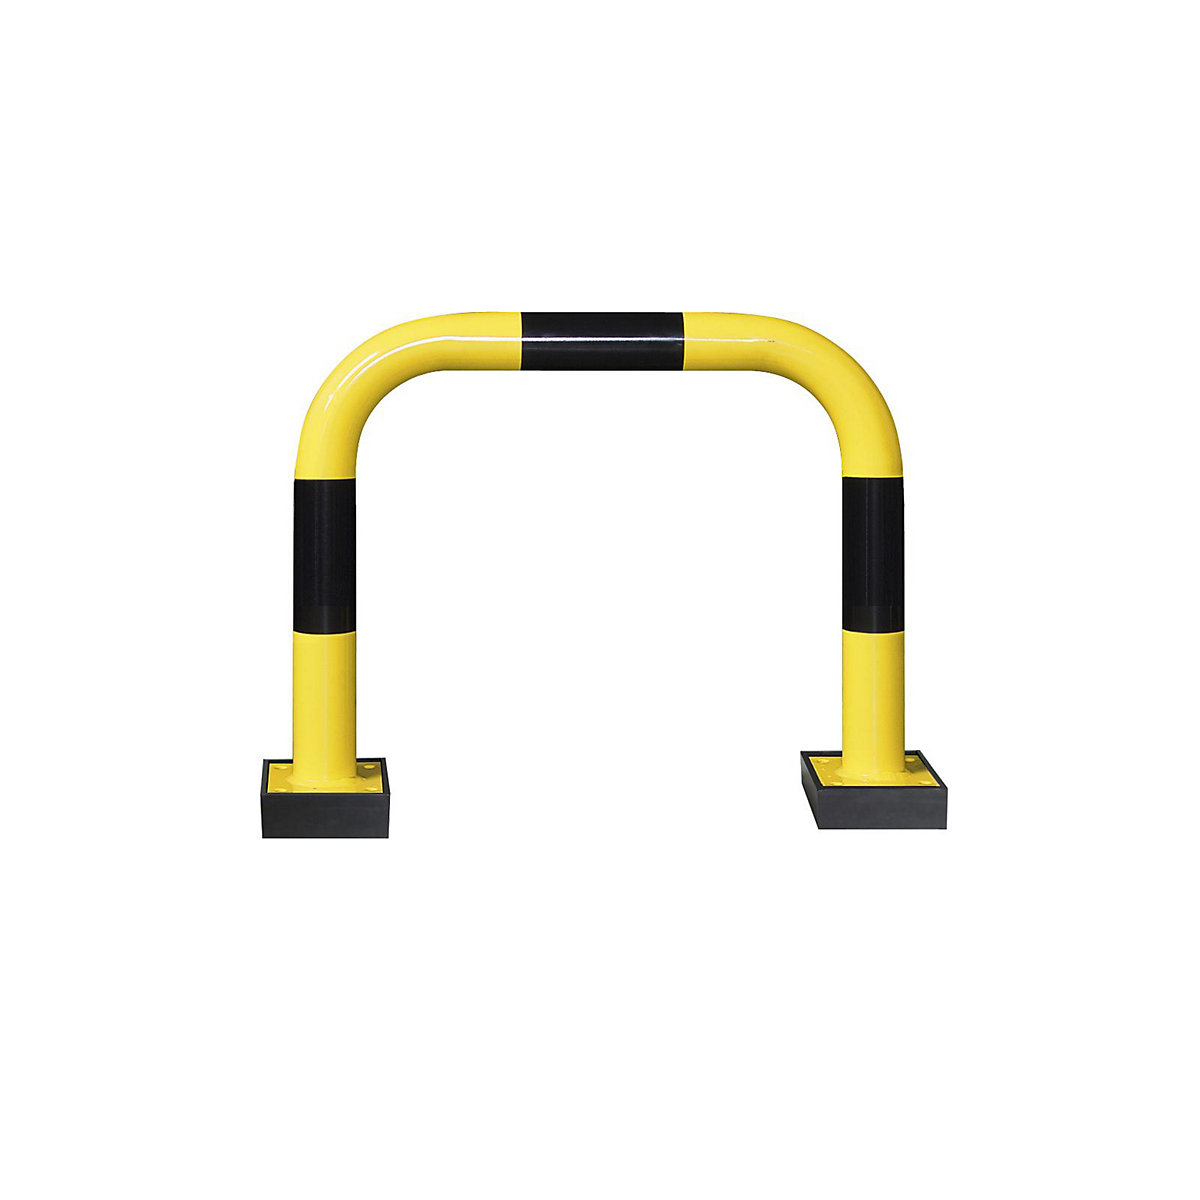 Crash protection bar, flexible, for indoor use, HxW 640 x 750 mm